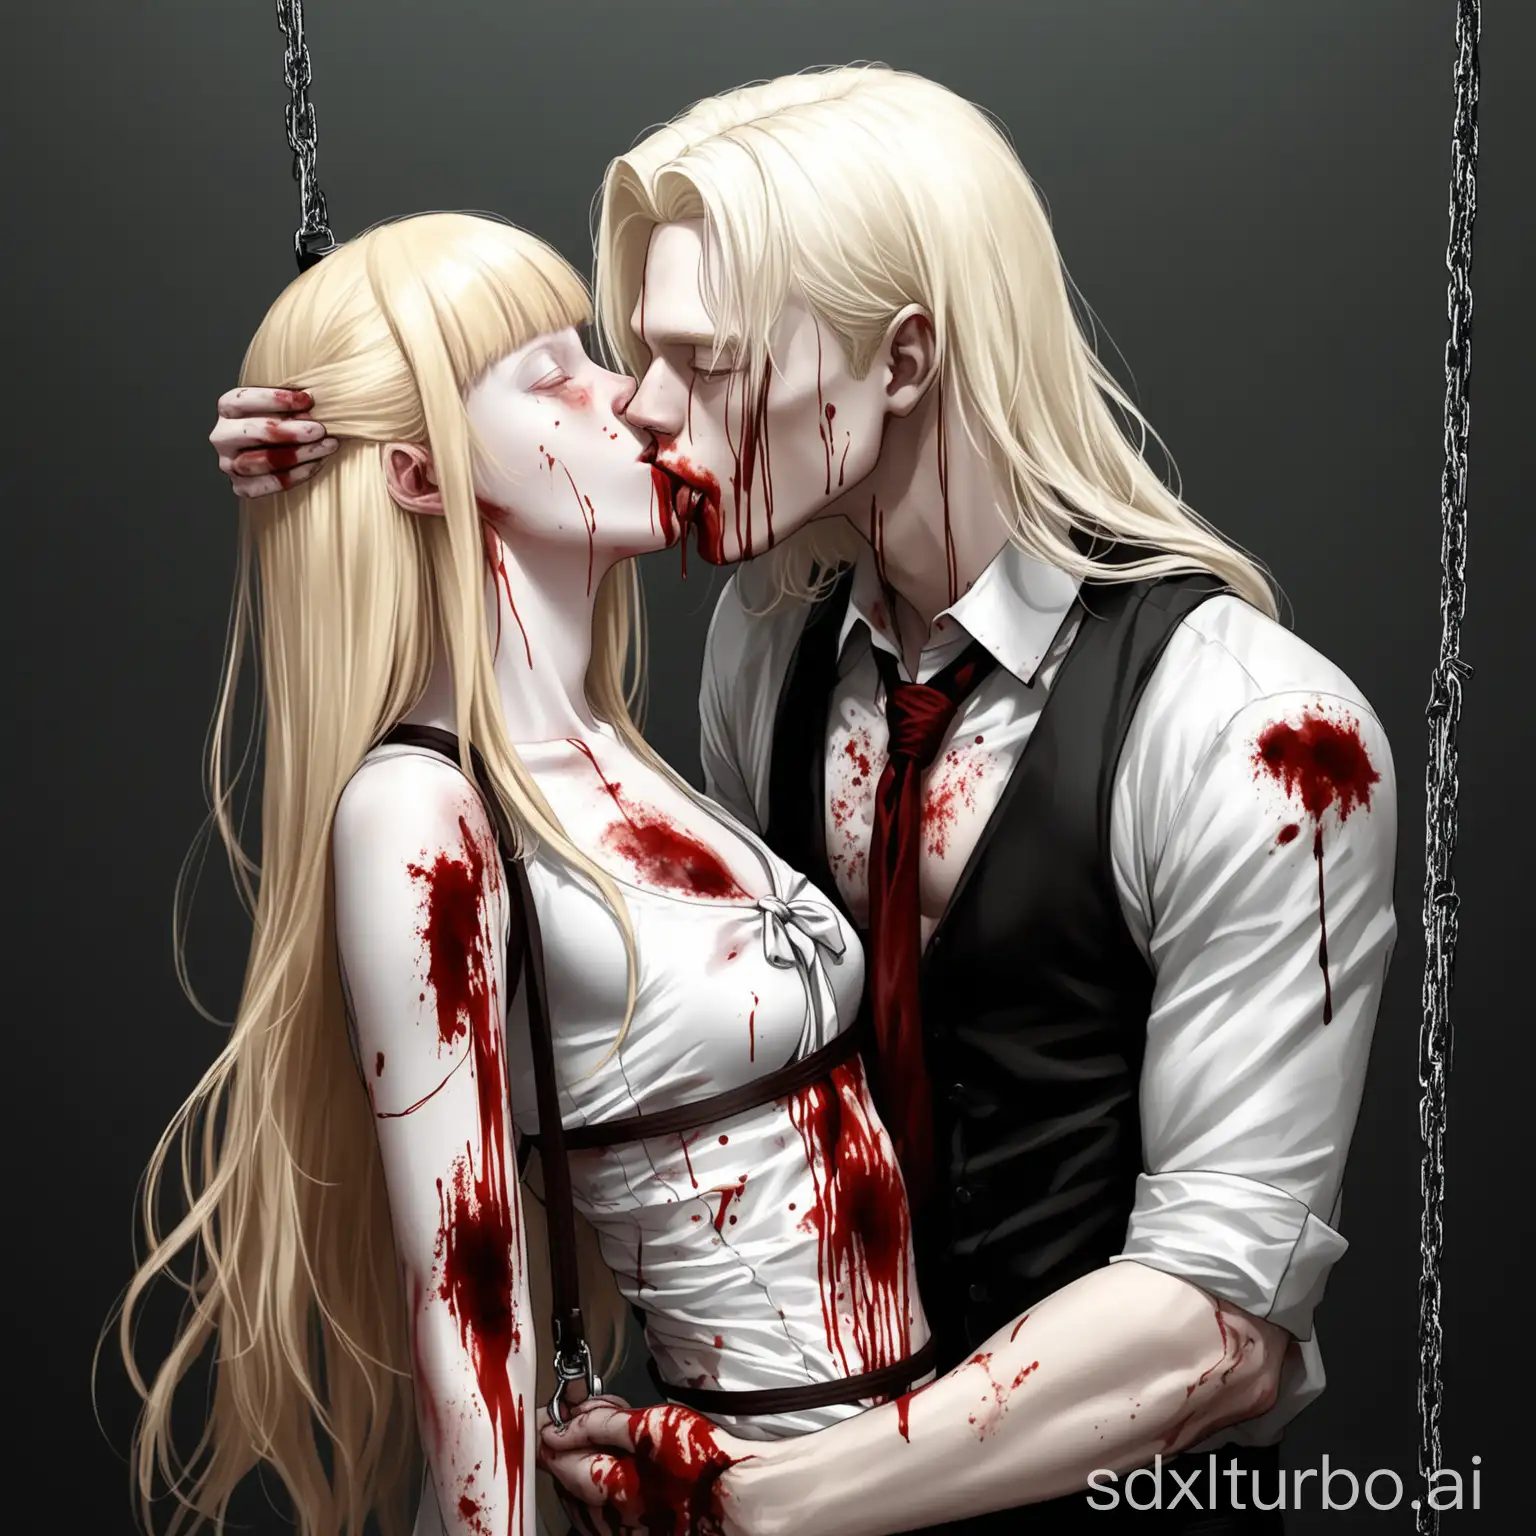 Albino handsome young man, long hair with bangs, with blood stains on the body, holding while kissing a blonde young woman on a leash, tied up